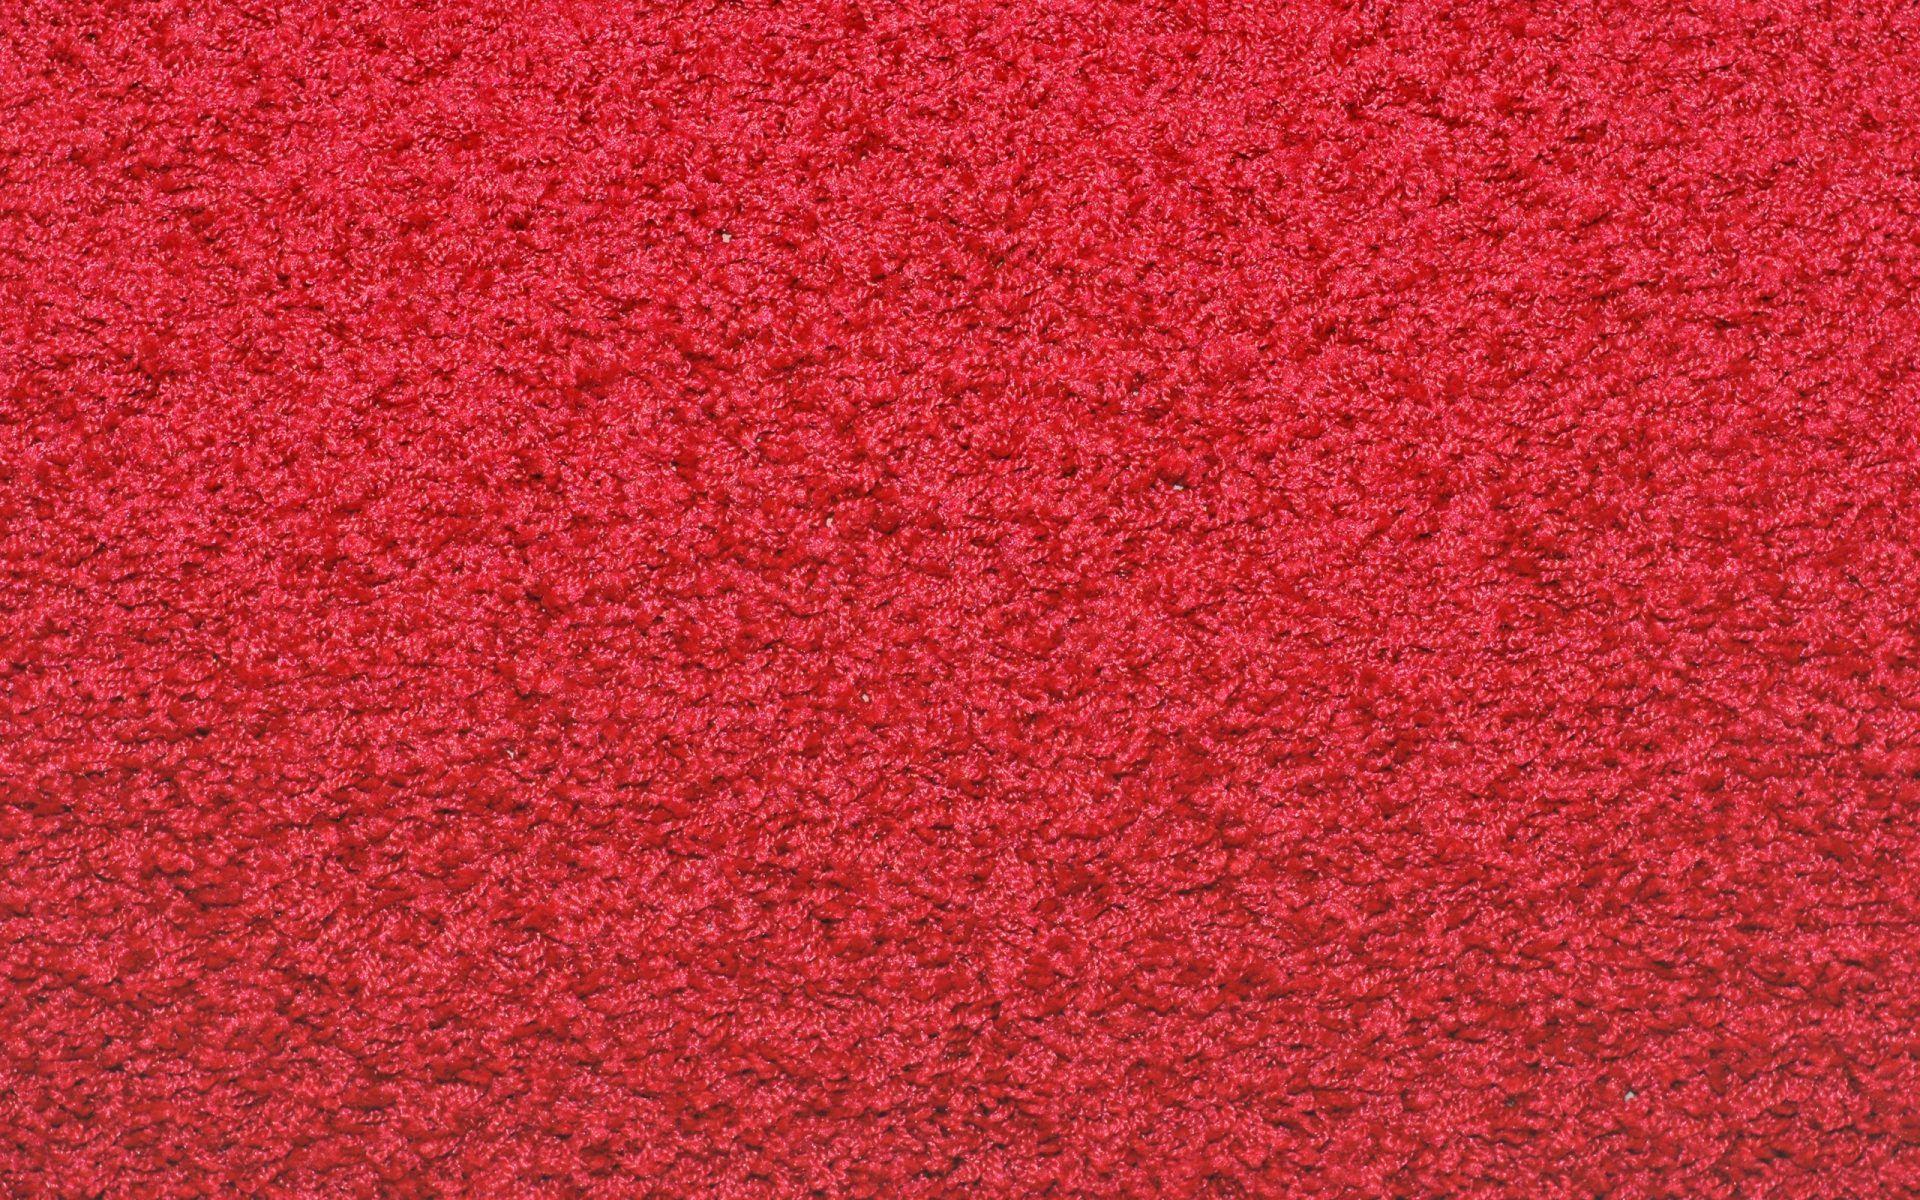 HD Image Bright Red Carpet Background 362 2560x1600 Wallpaper